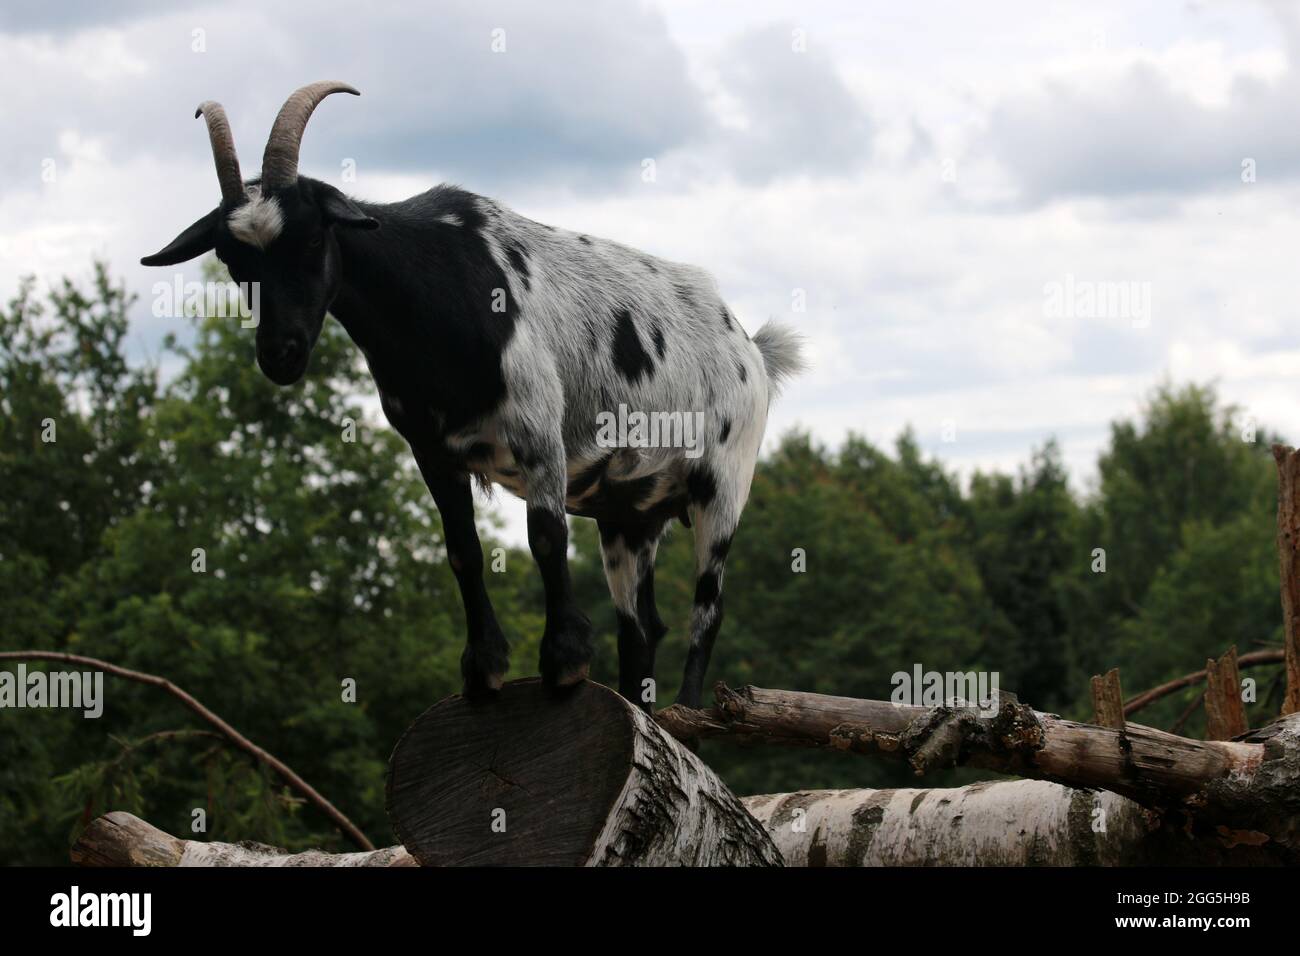 Goat on a log in an elevated position Stock Photo